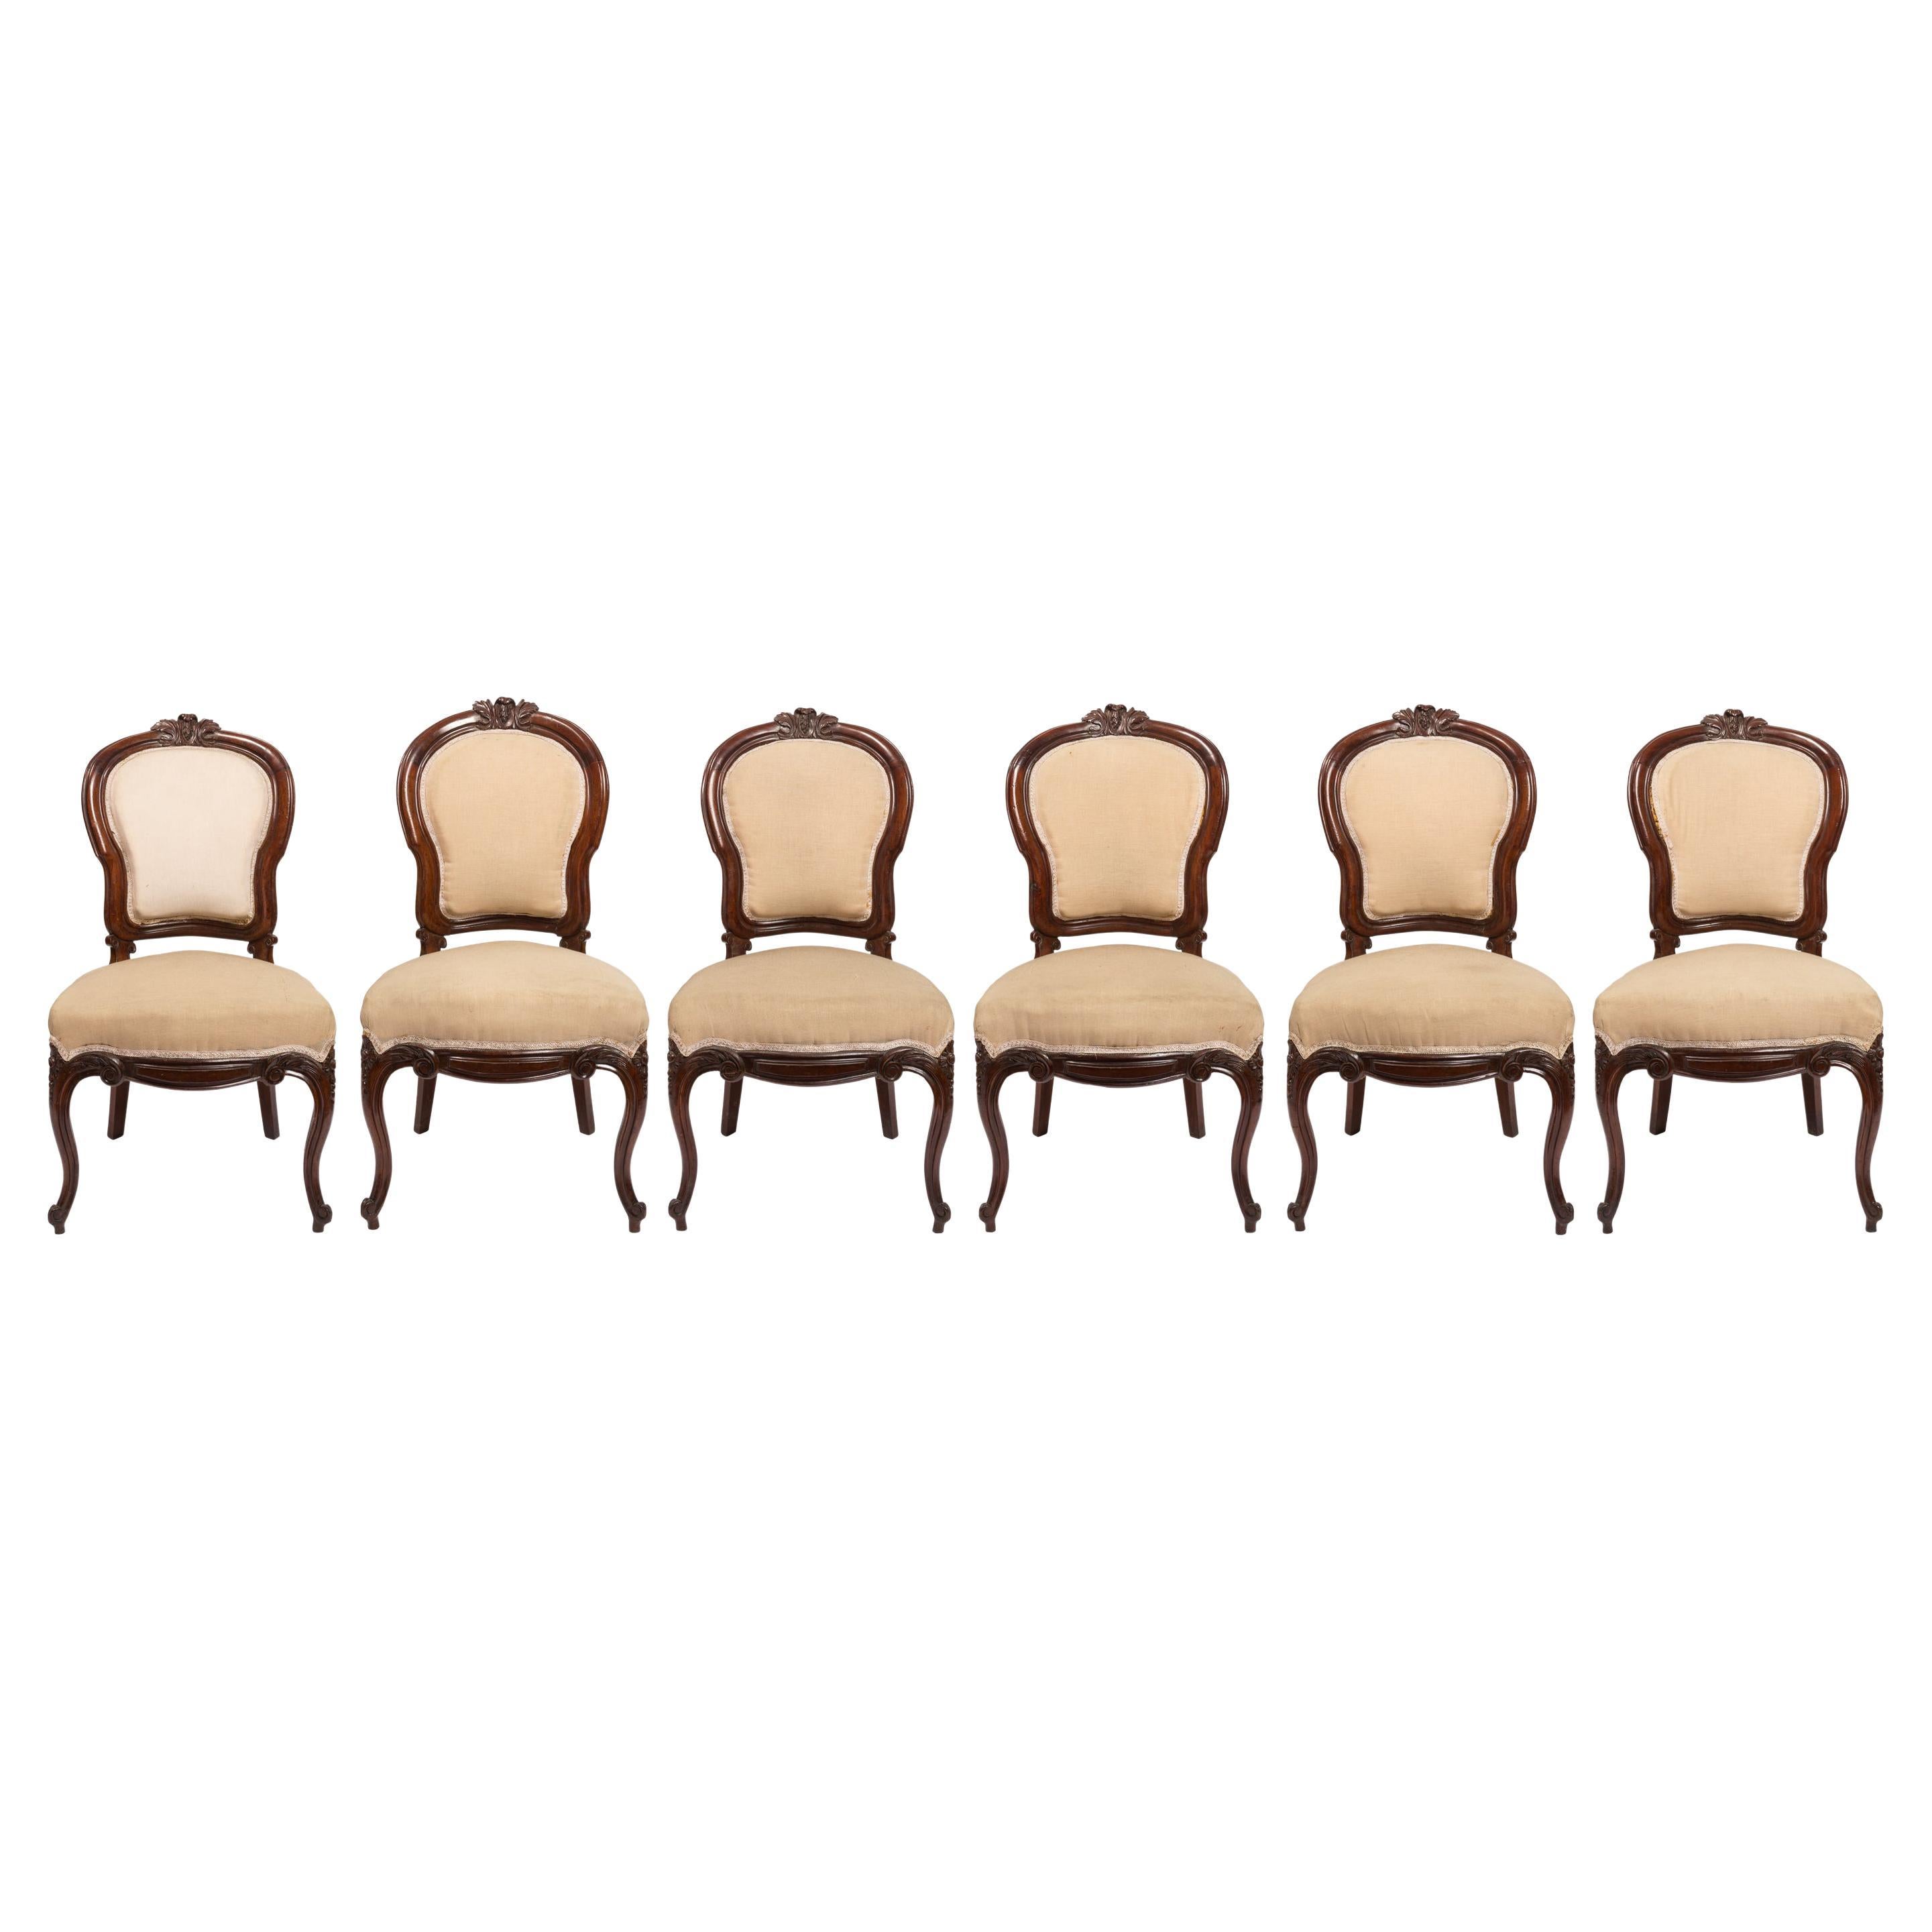 Set of Six Upholstered, Carved Spanish Isabelina / Victorian Period Side Chairs